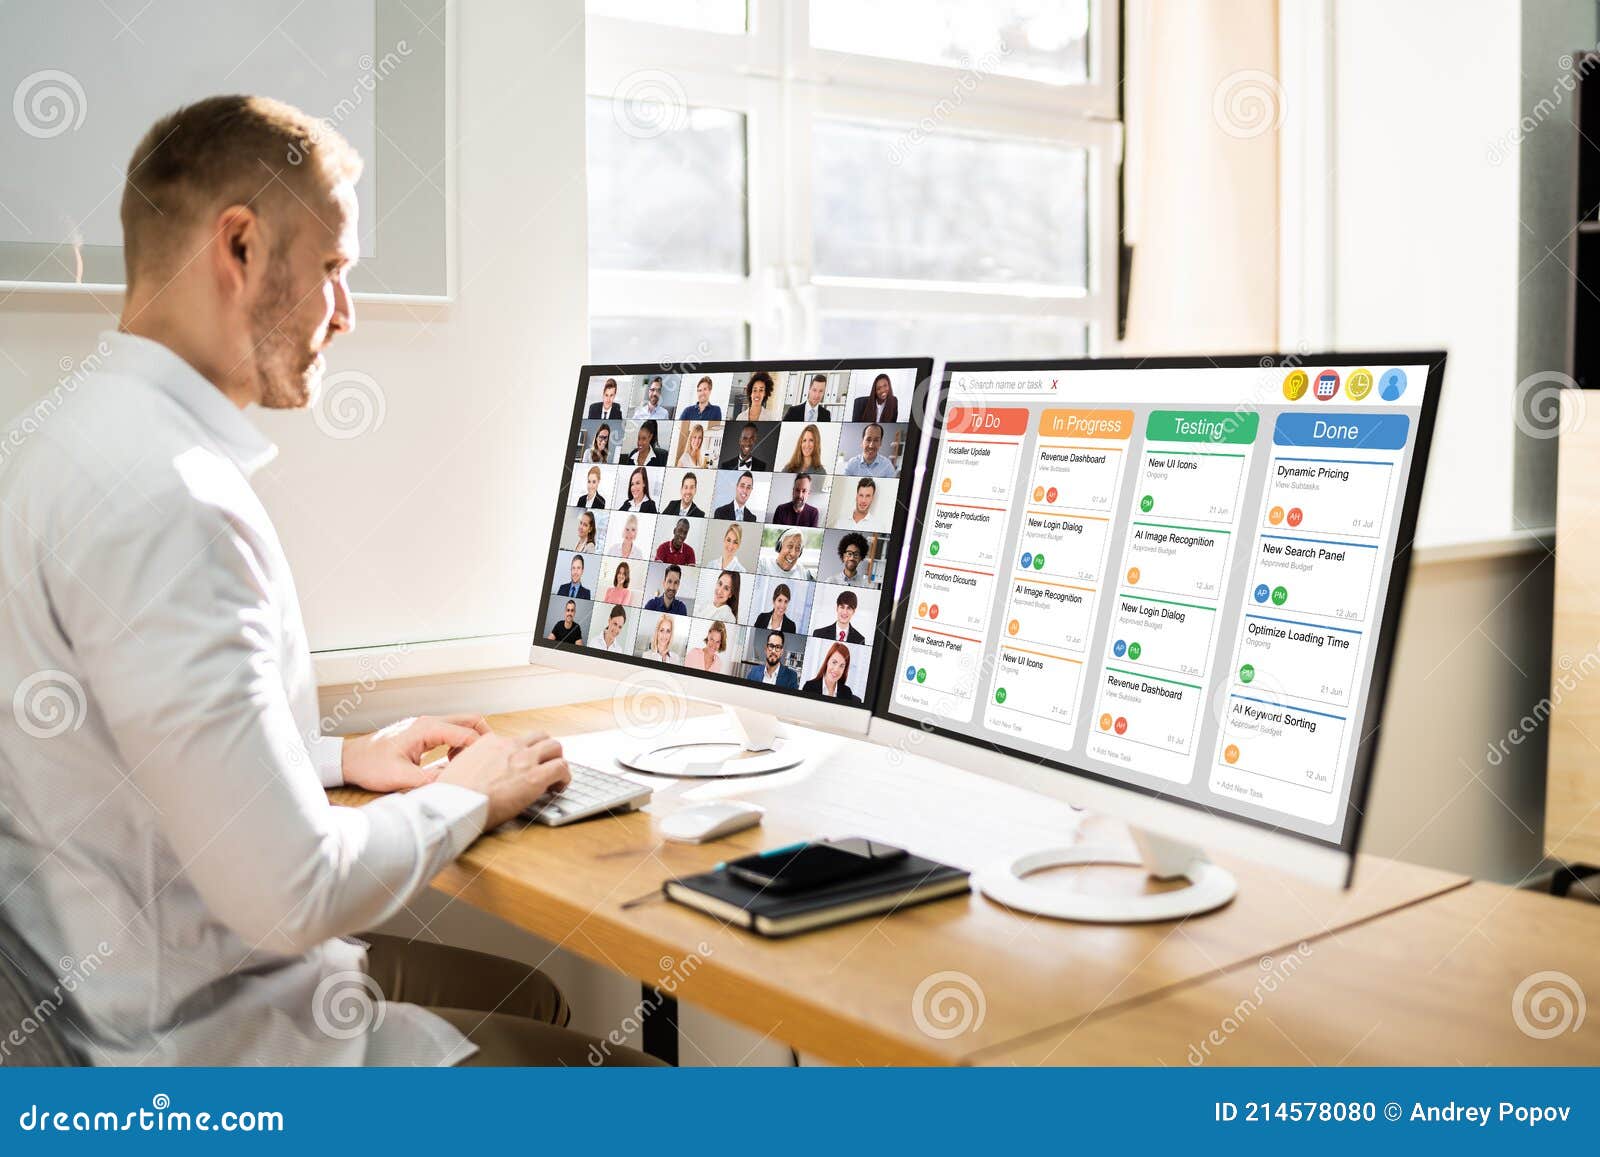 online remote video conference webinar call